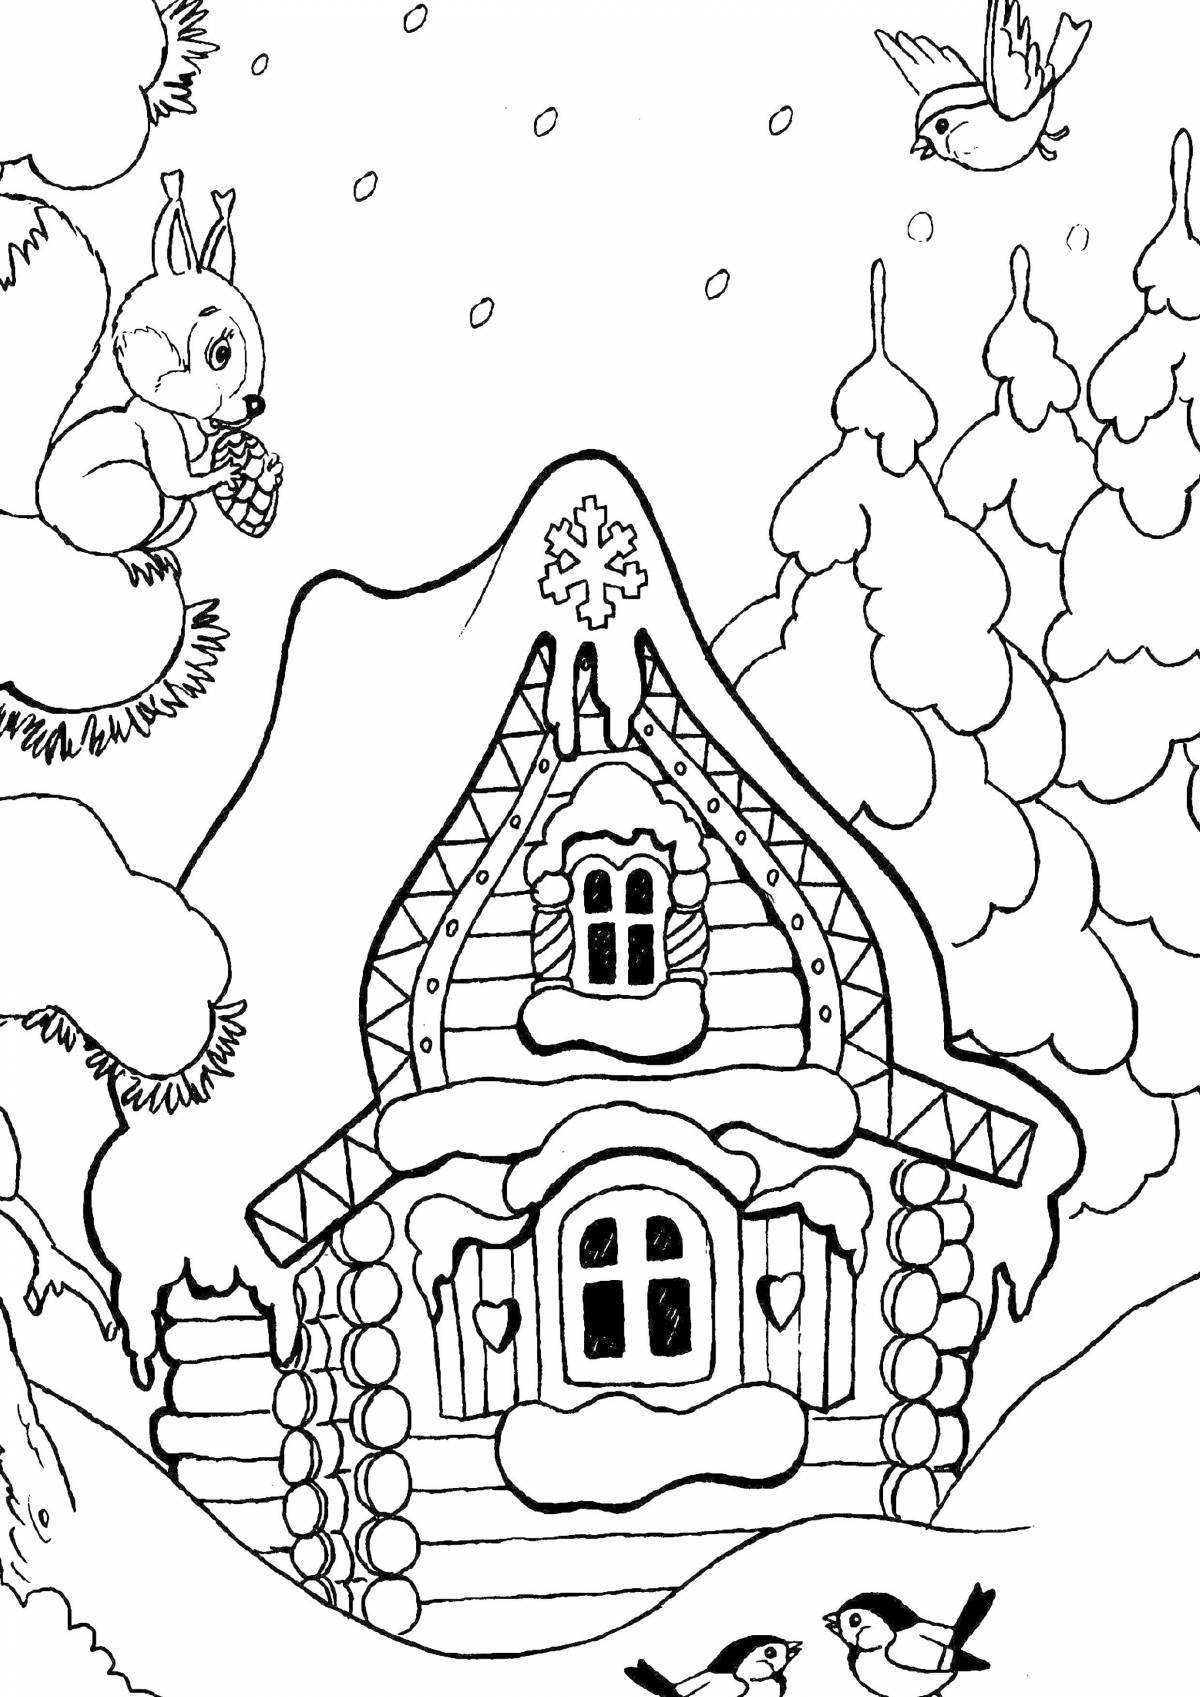 Colouring awesome hut